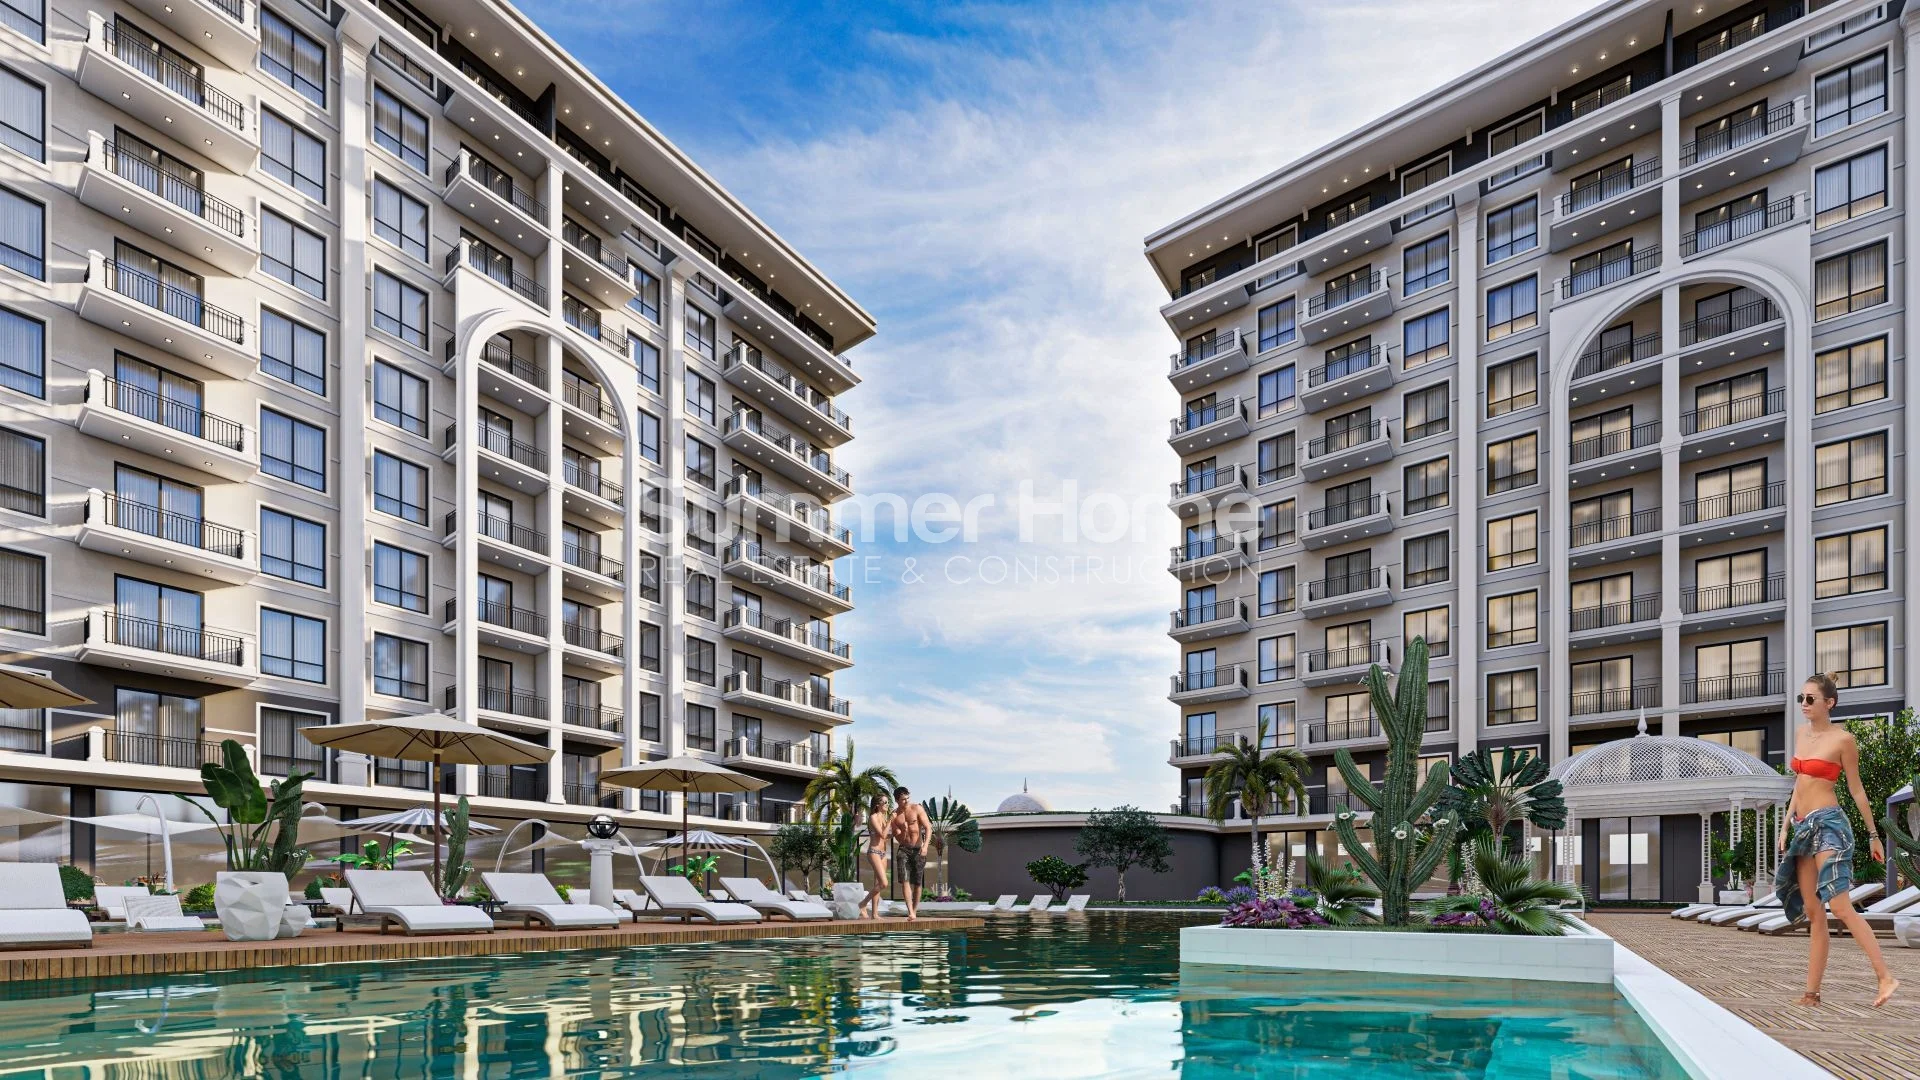 Modern, Chic Apartments For Sale in Demirtas General - 3